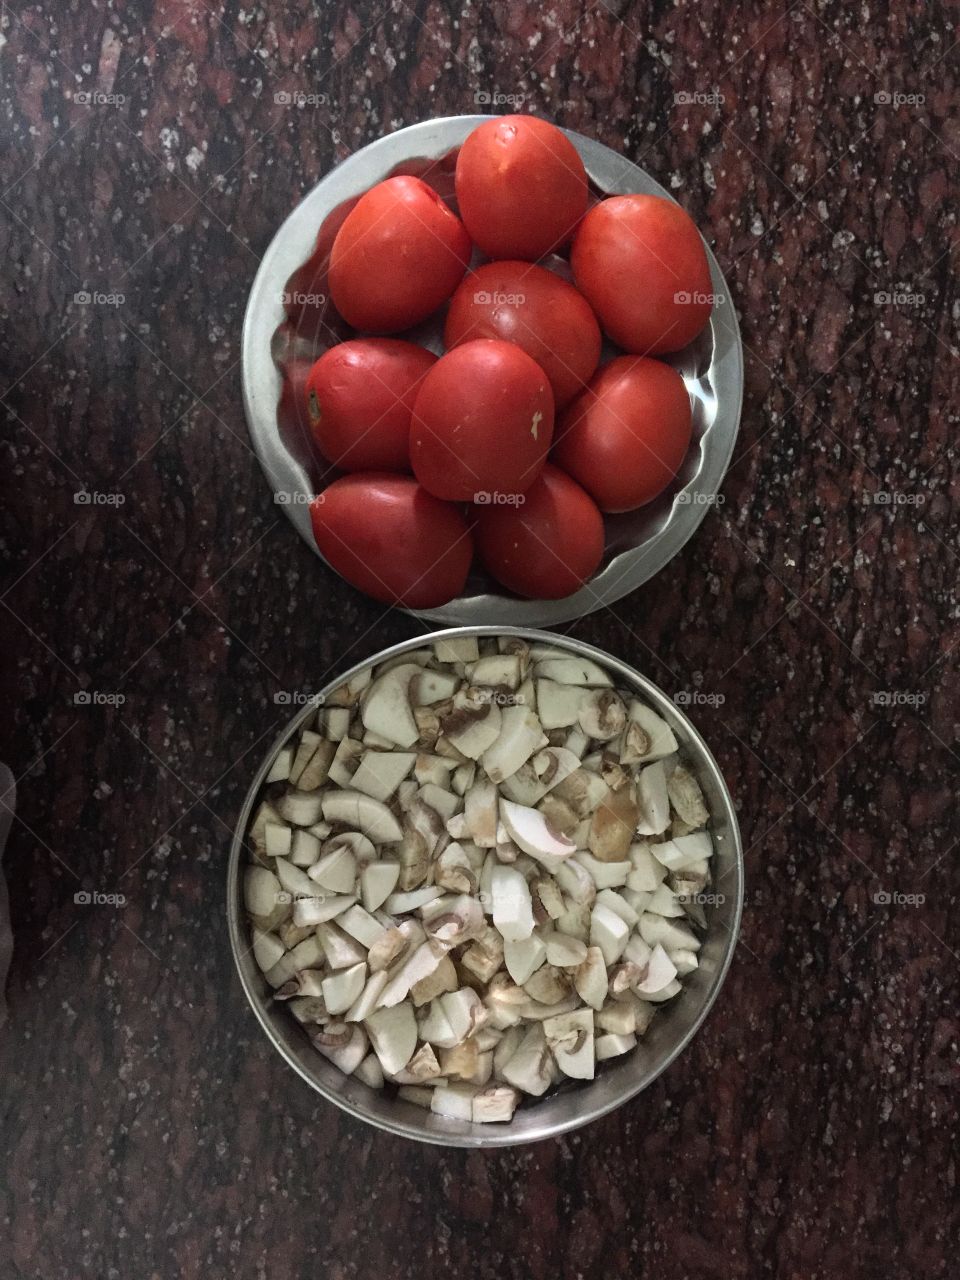 When tomatoes mixed with mushrooms creats a awesom taste...